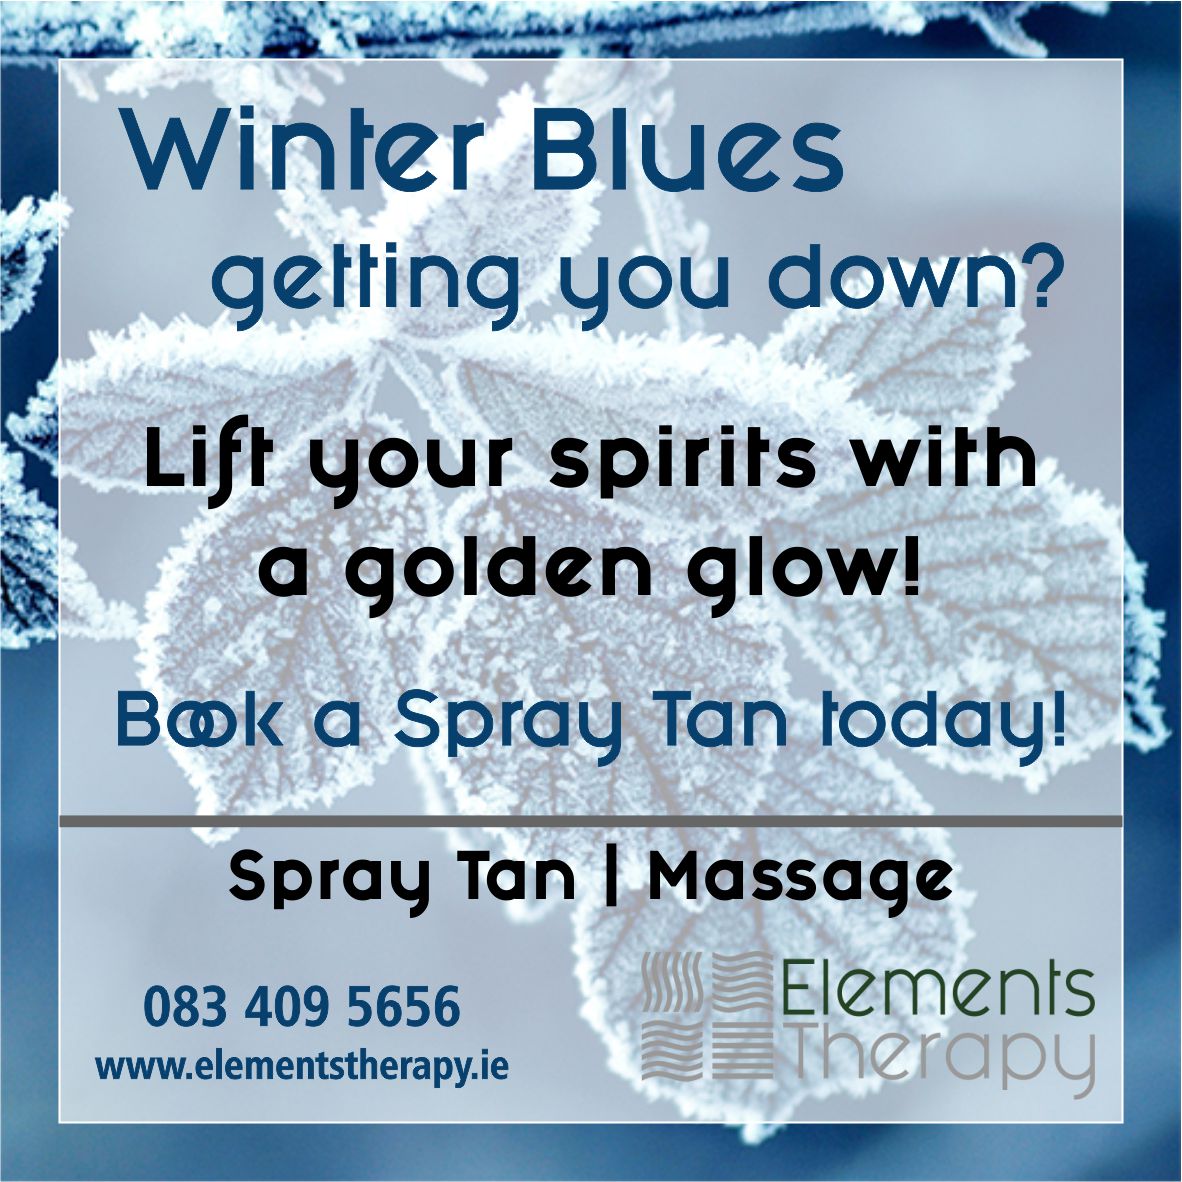 Got the Winter Blues? A spray tan is guaranteed to lift your spirits and boost your mood! Book yours today and get that golden glow! #winterblues #goldenglow #liftyourspirits #boostyourmood #supportlocal #spraytan #mobilespraytan